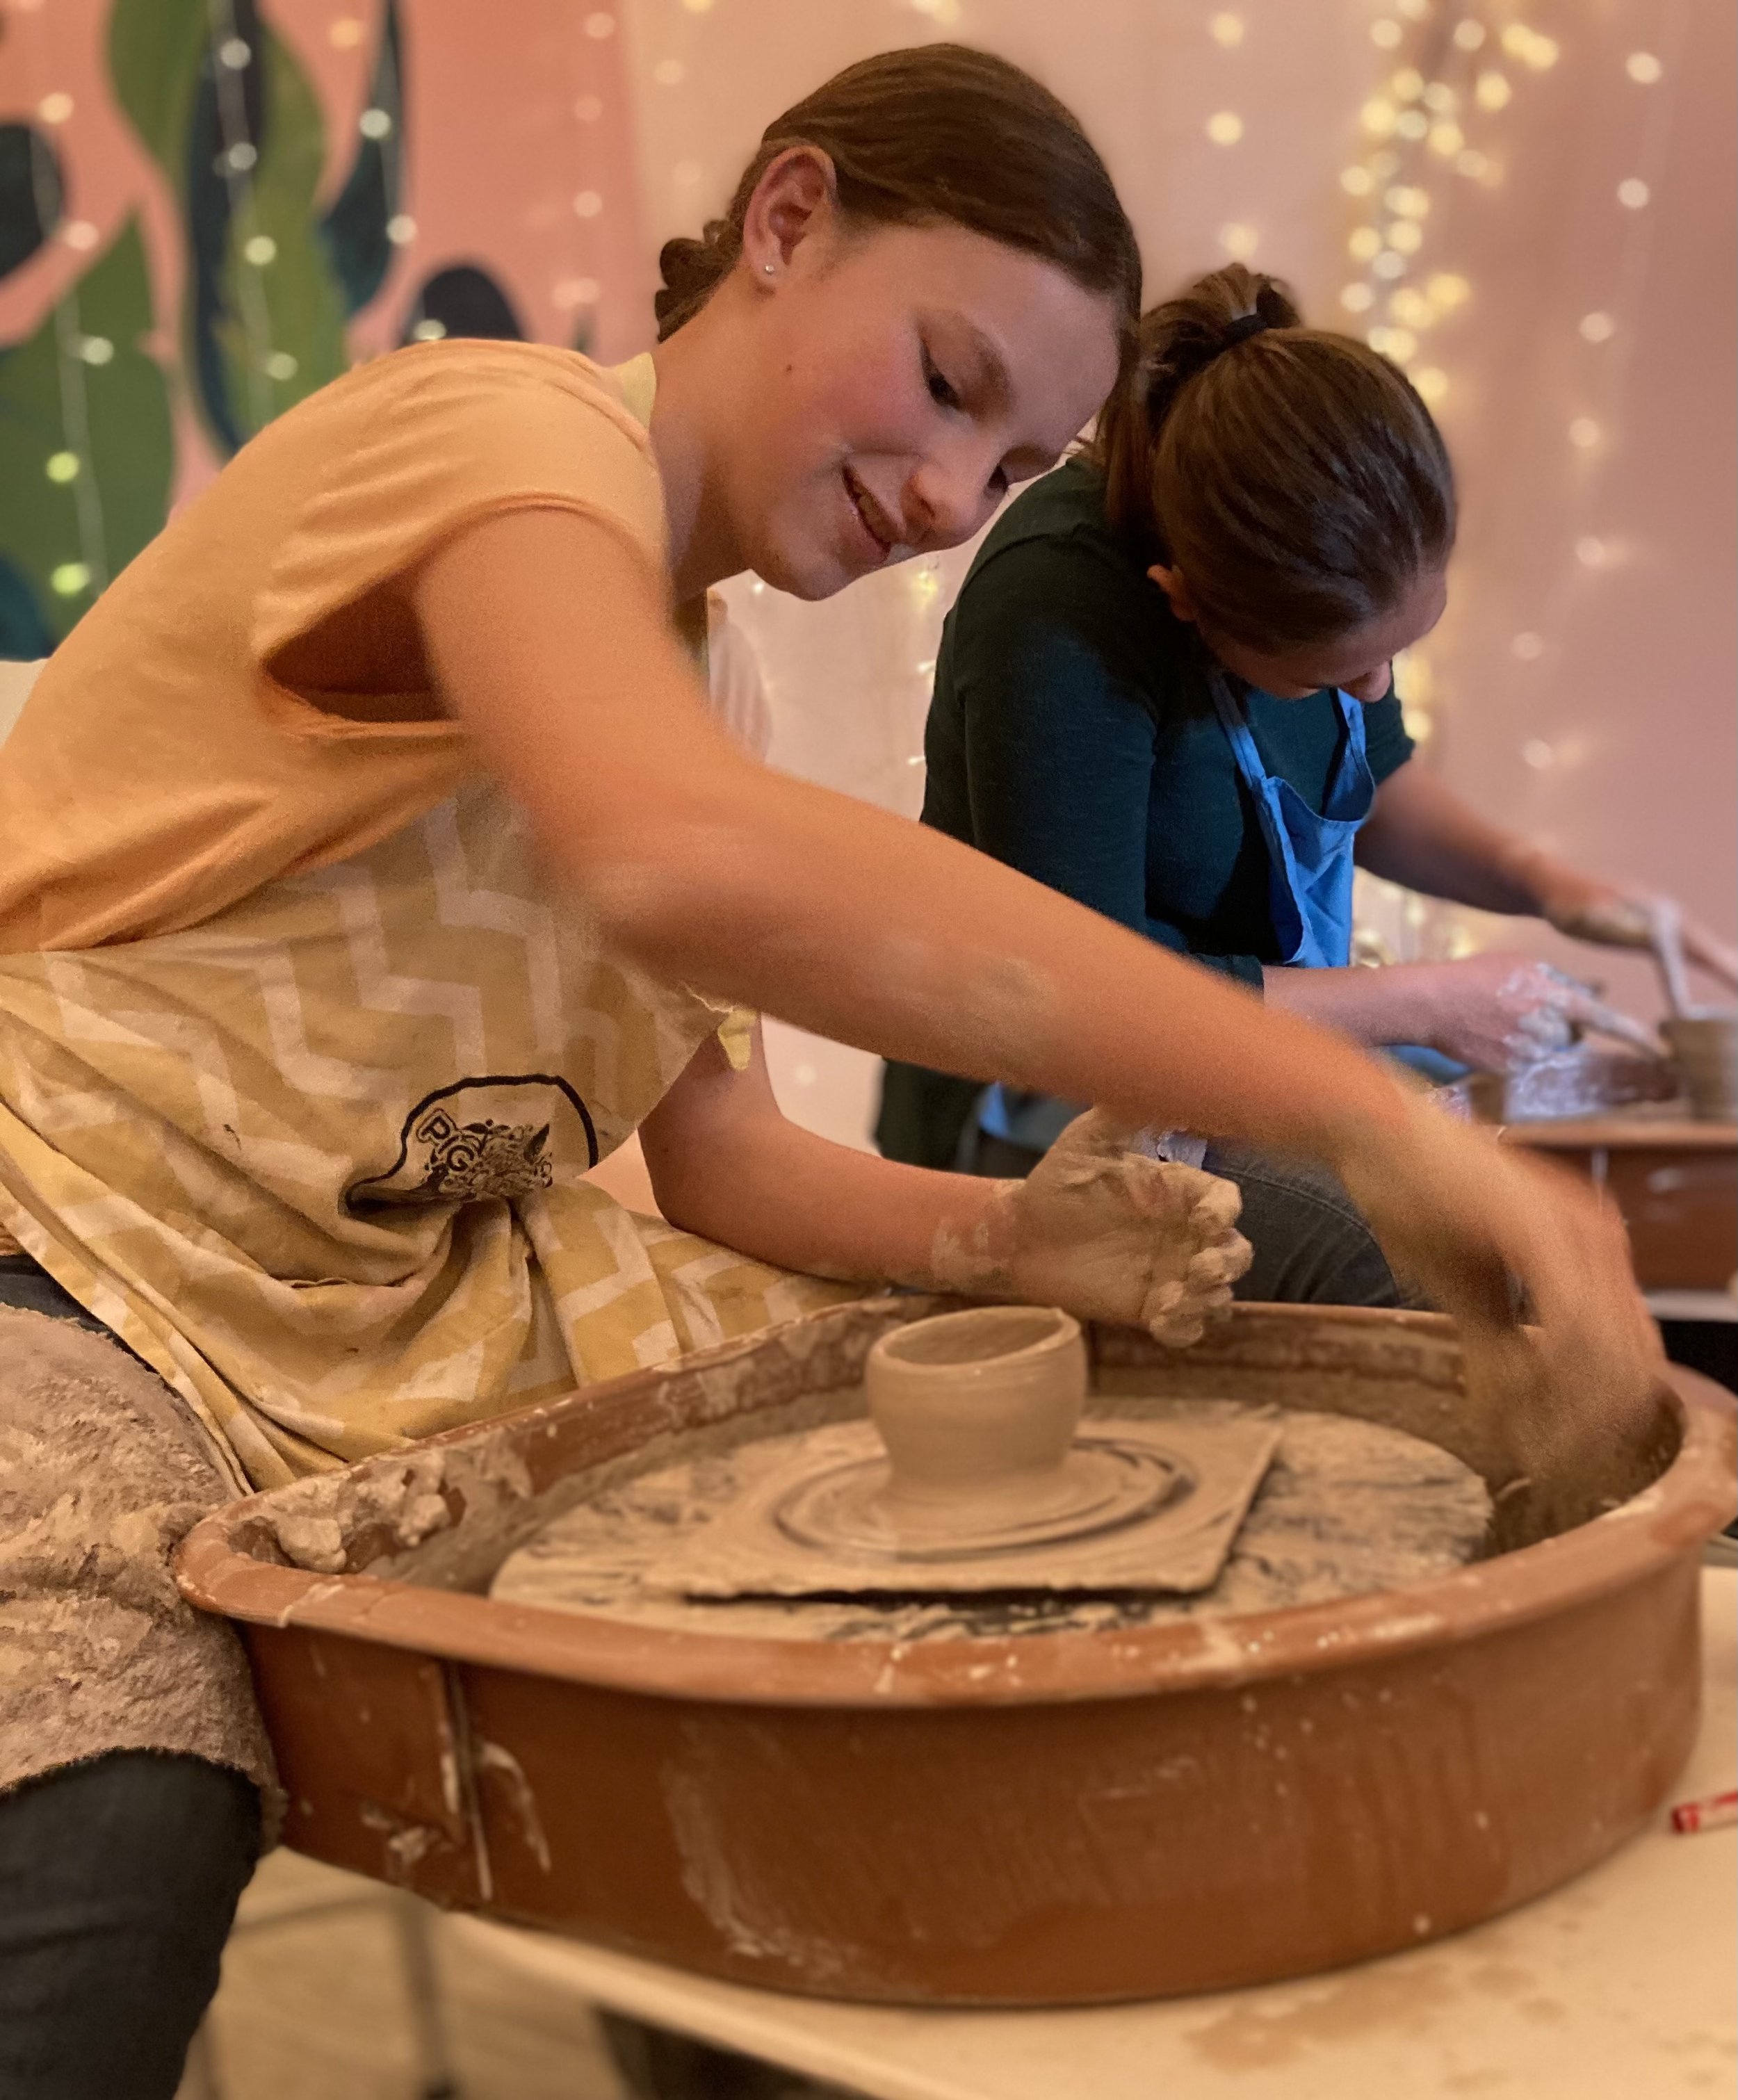 Pottery Wheel for Kids and Adults — The Pigeon and The Hen Pottery